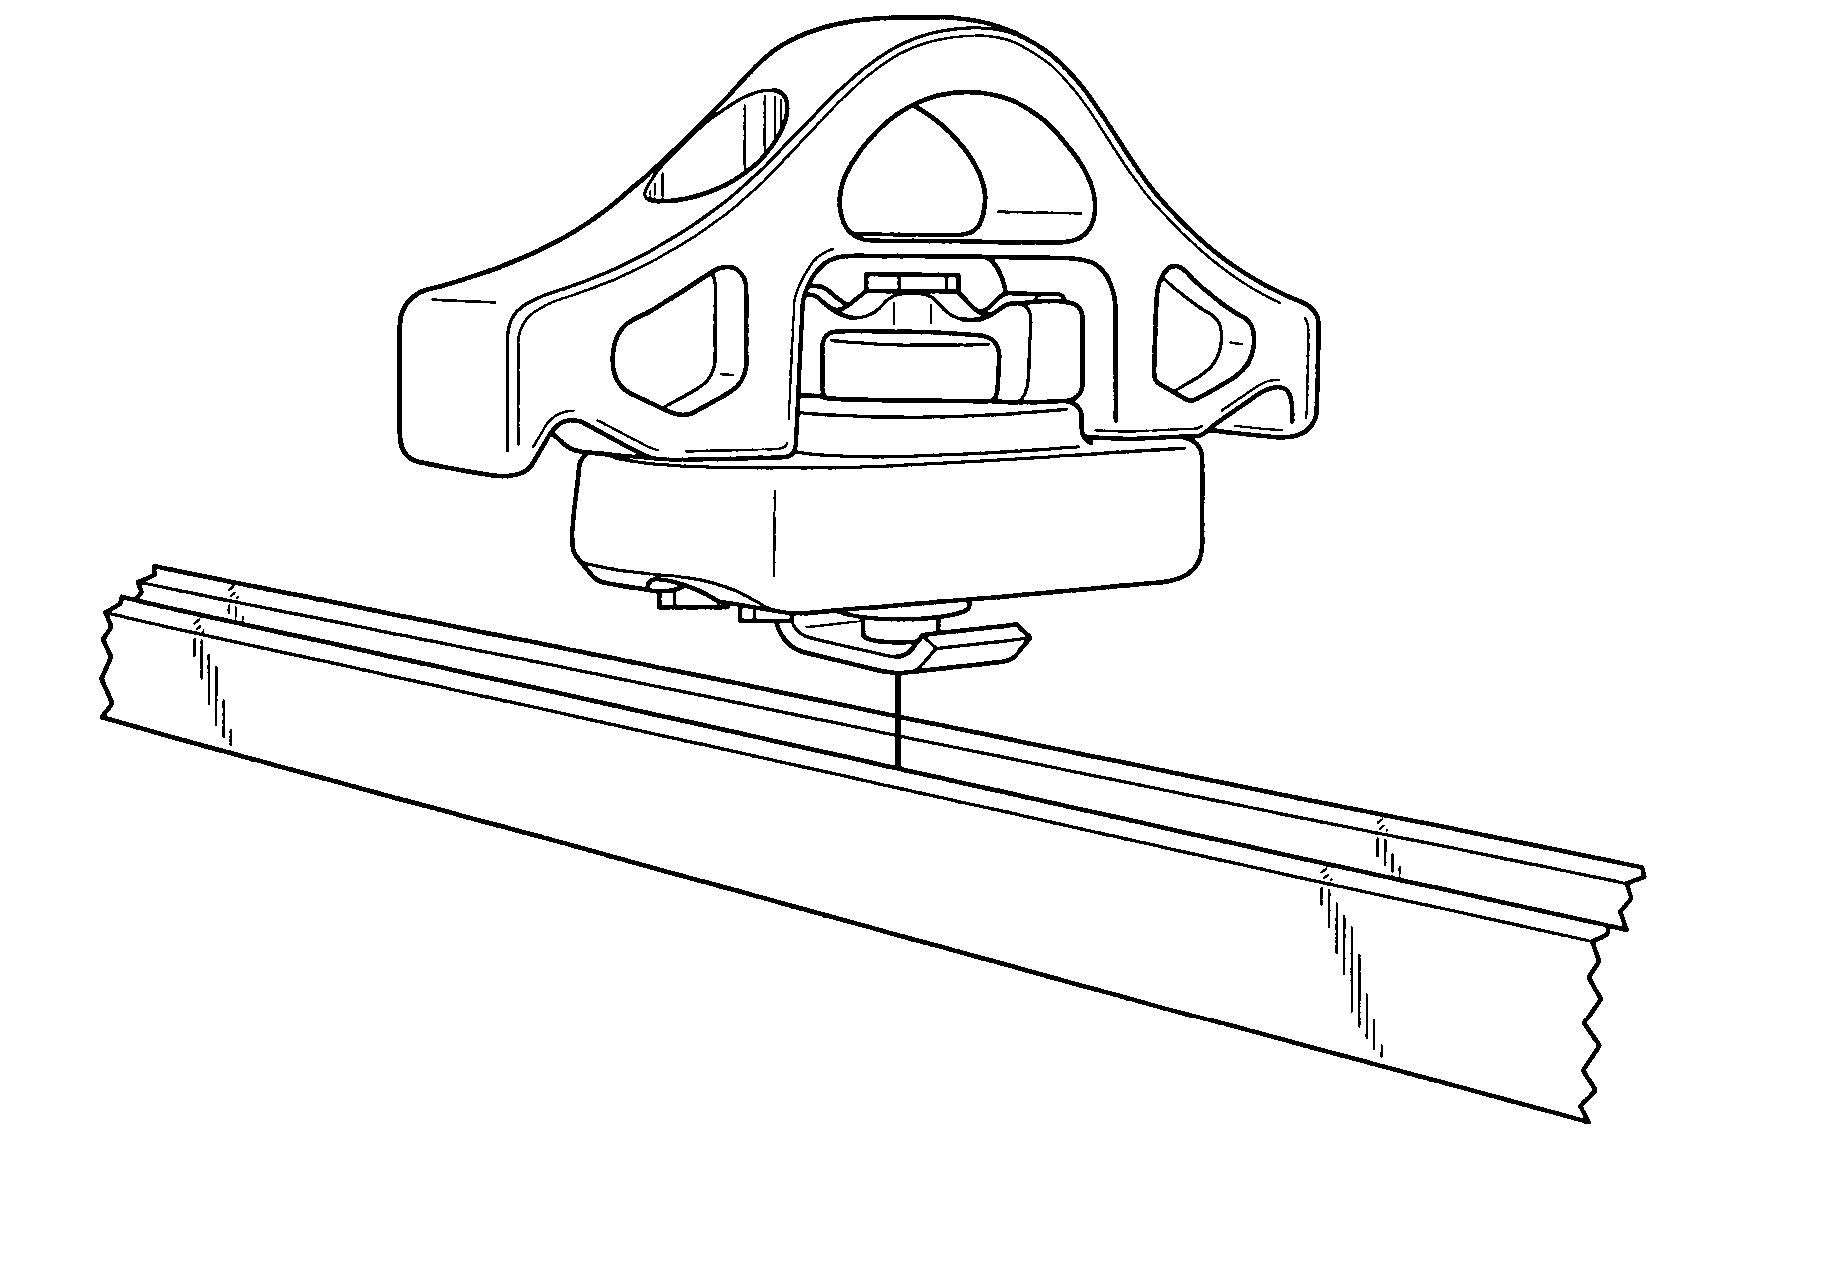 Securement mechanism including top loading tie down cleat assembly and locking member